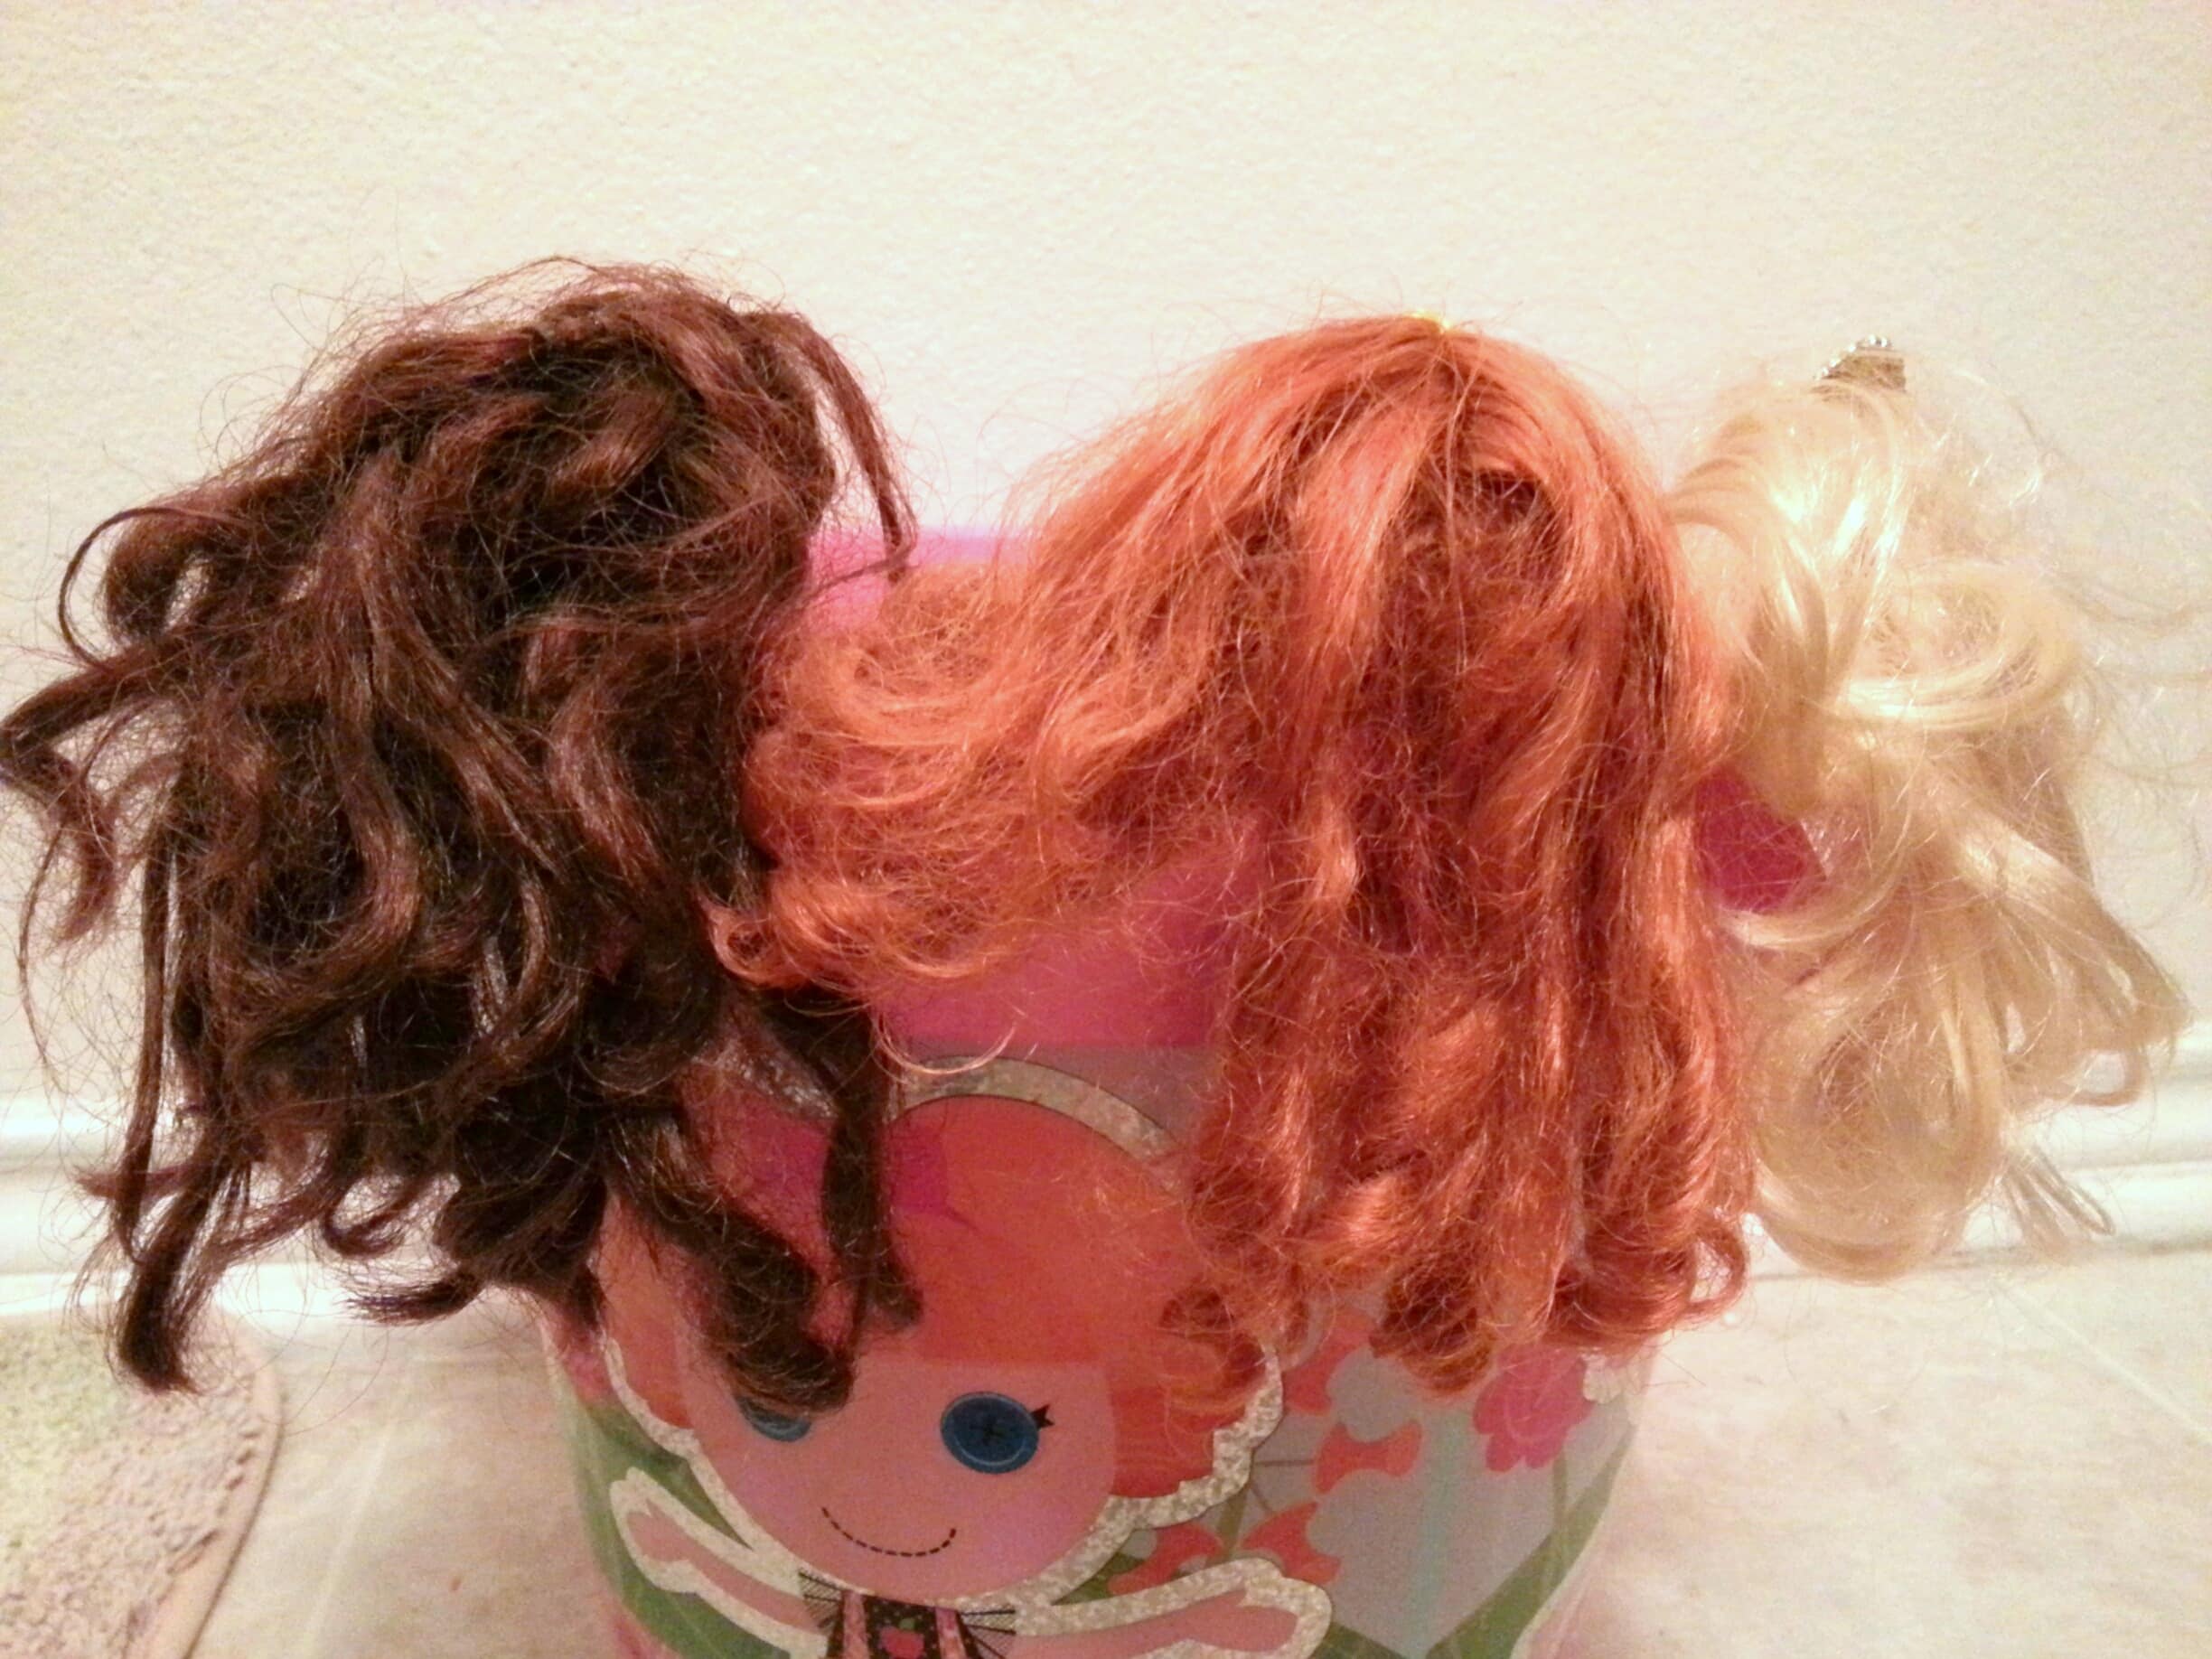 How to make doll hair, Easy doll hair pattern, Comb able hair for styling